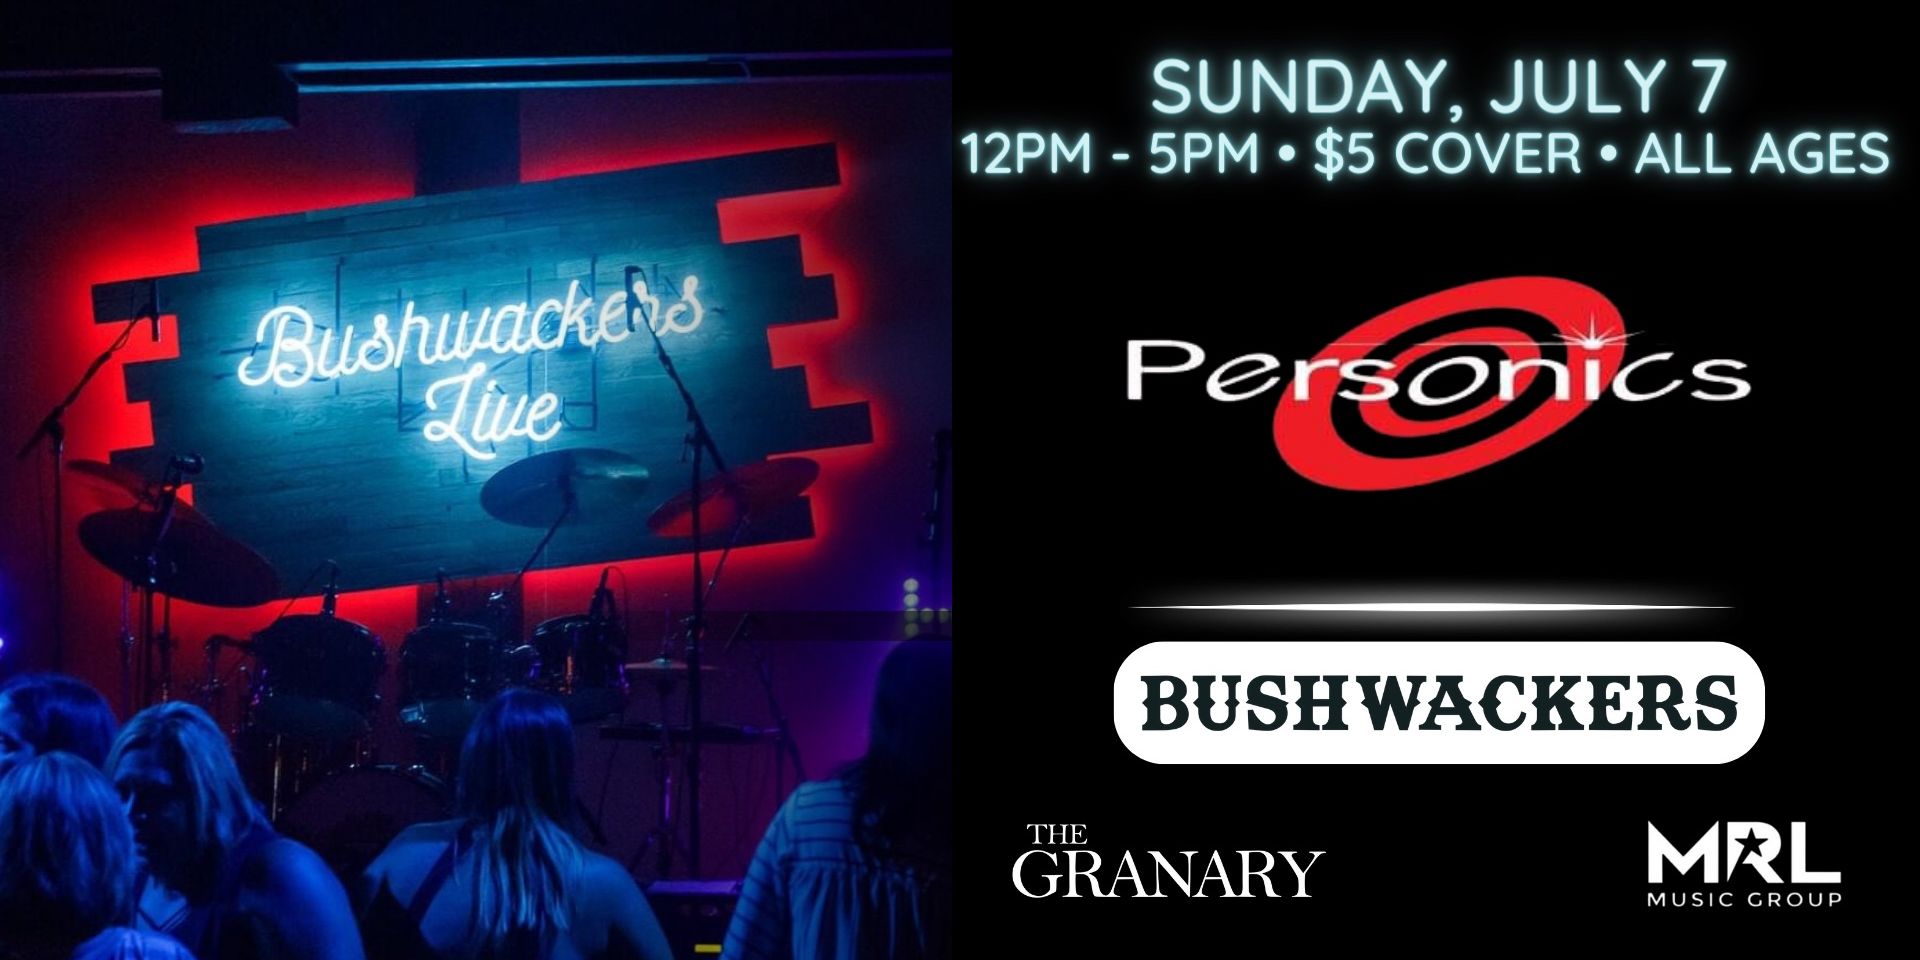 Sunday Family Fun Day with the Personics Band promotional image